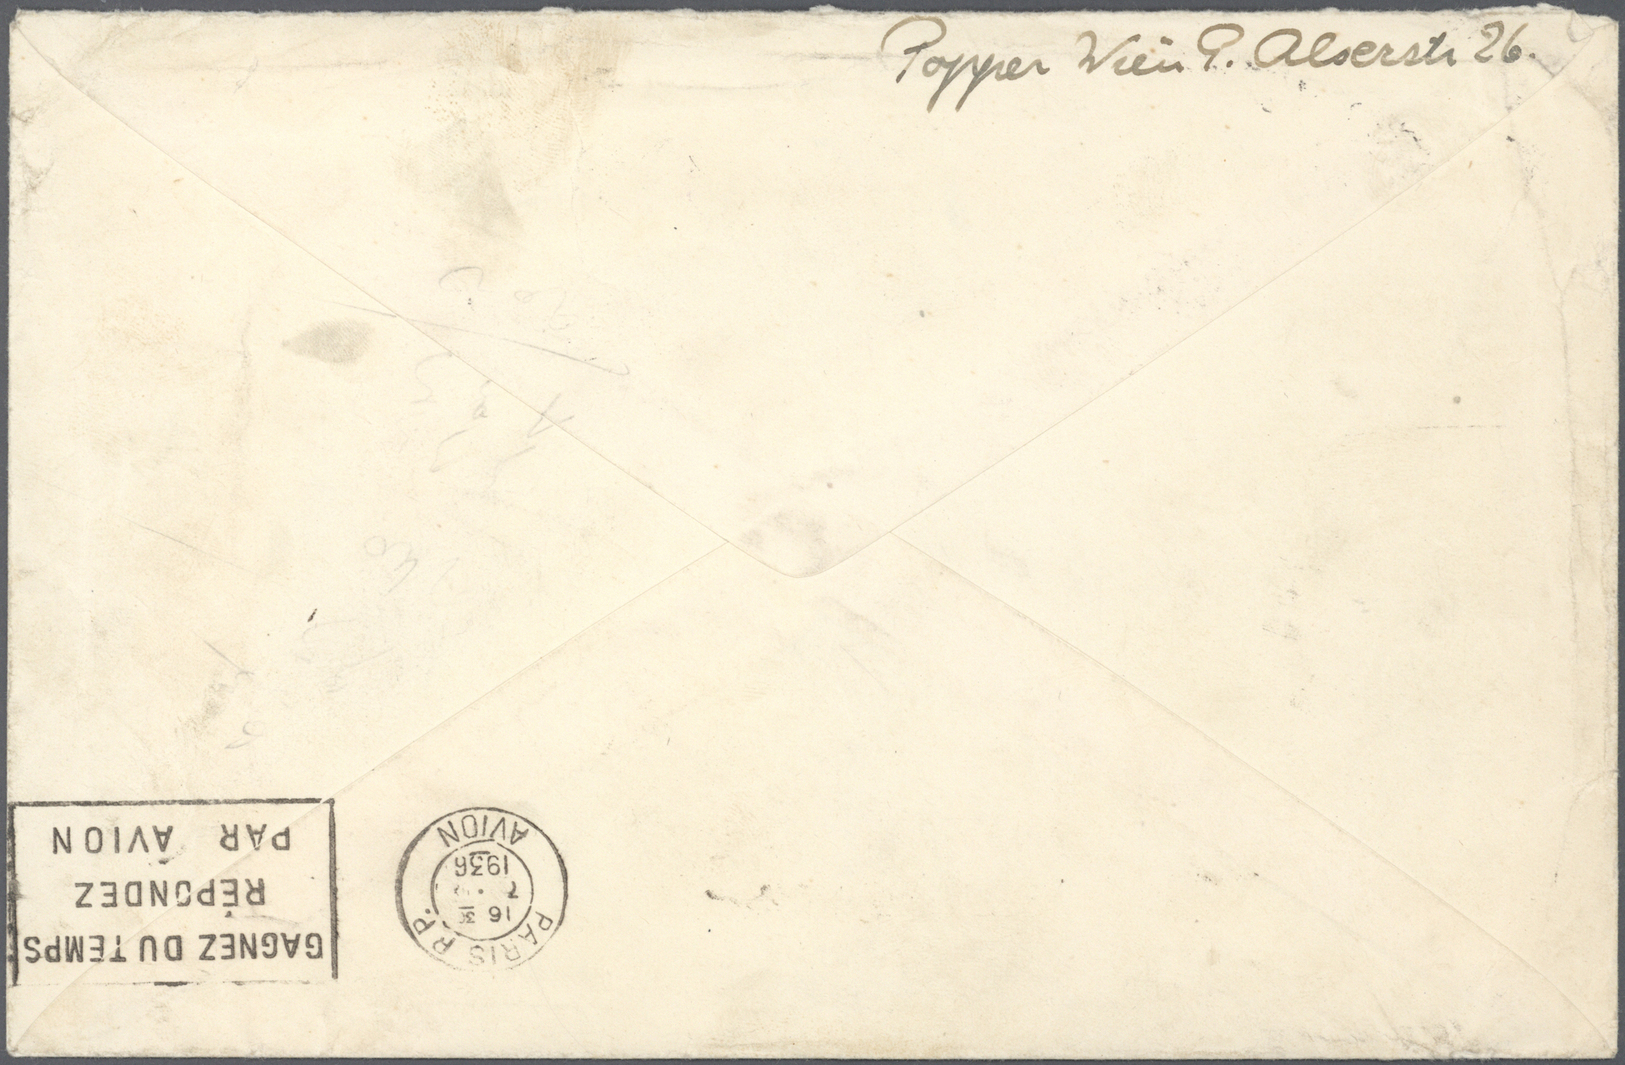 Br/ Frankreich - Portomarken: 1936, Somewhat Heavier Airmail Envelope From WIEN FLUGPOST 7.X.36 Taxed "T" In Paris - 1859-1959 Covers & Documents